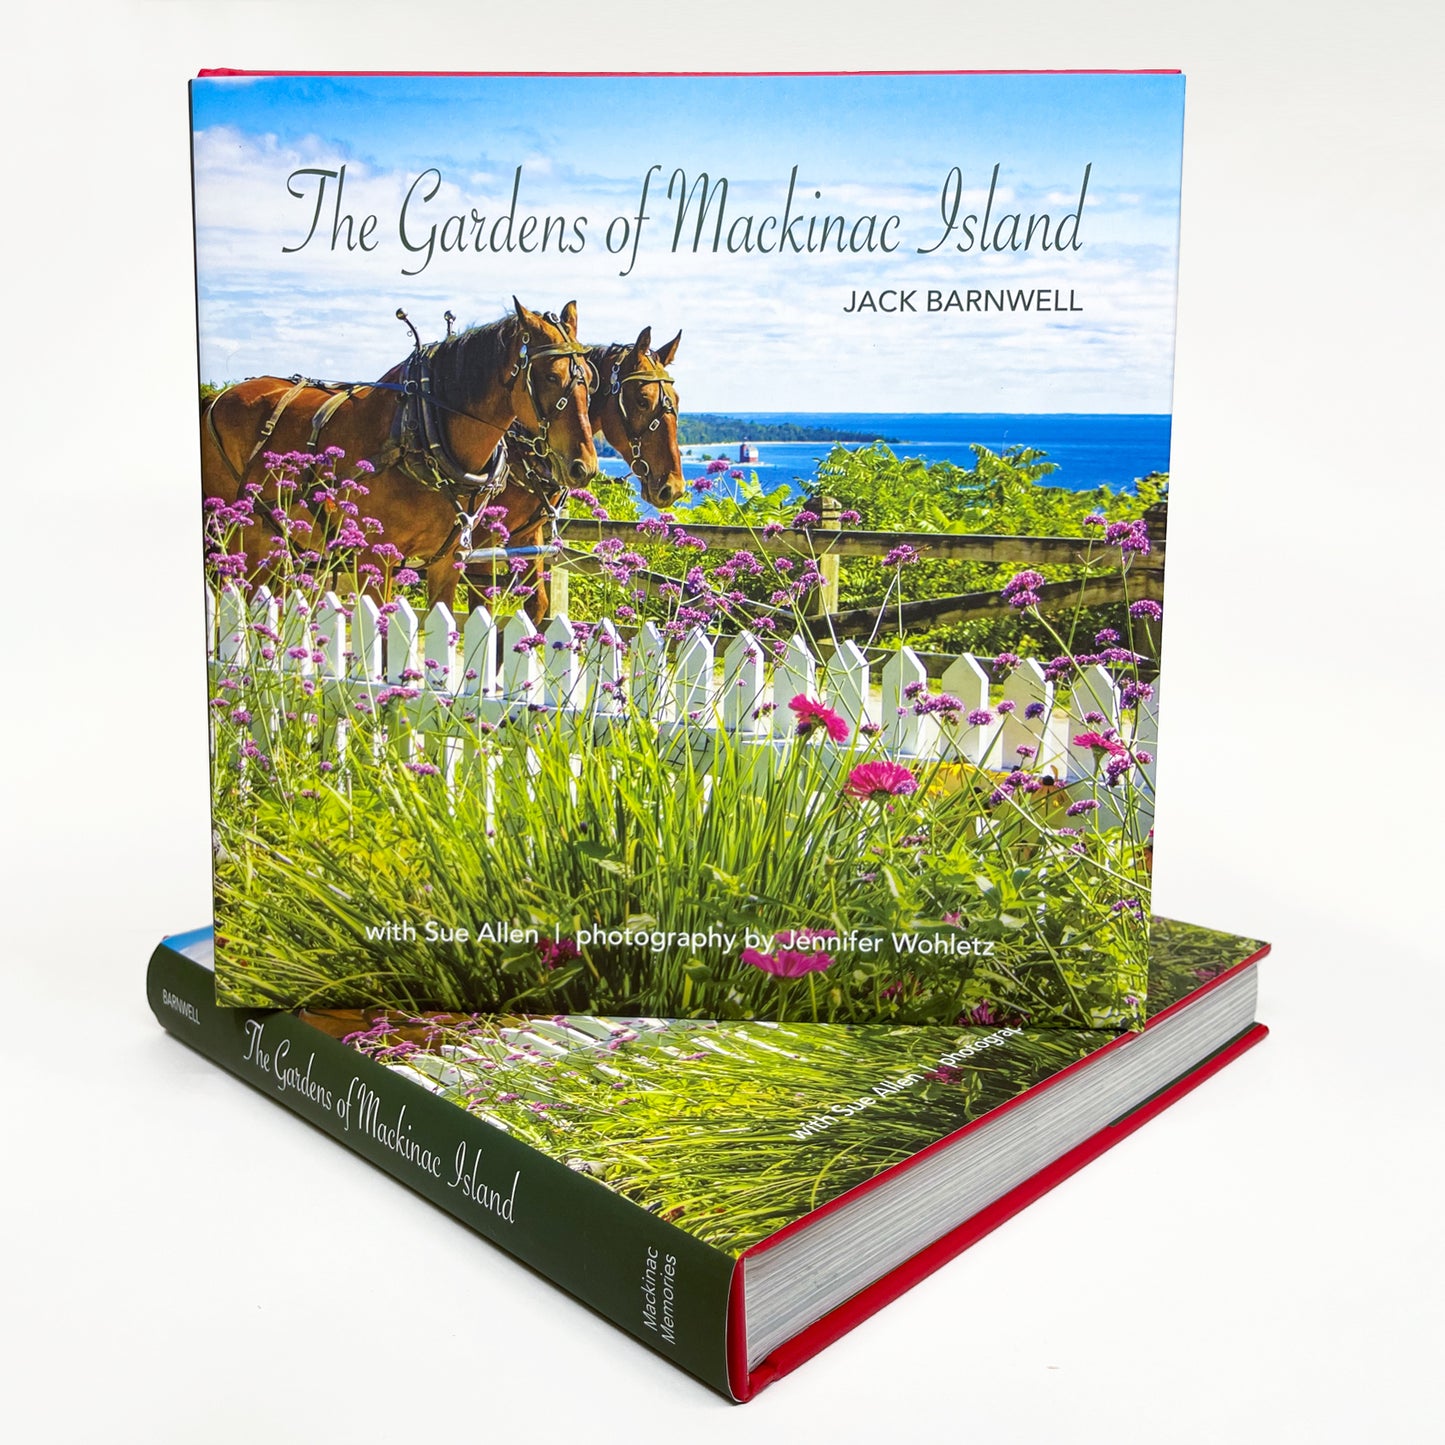 The Gardens of Mackinac Island Book by Jack Barnwell and Sue Allen.  Photography by Jennifer Wohletz.